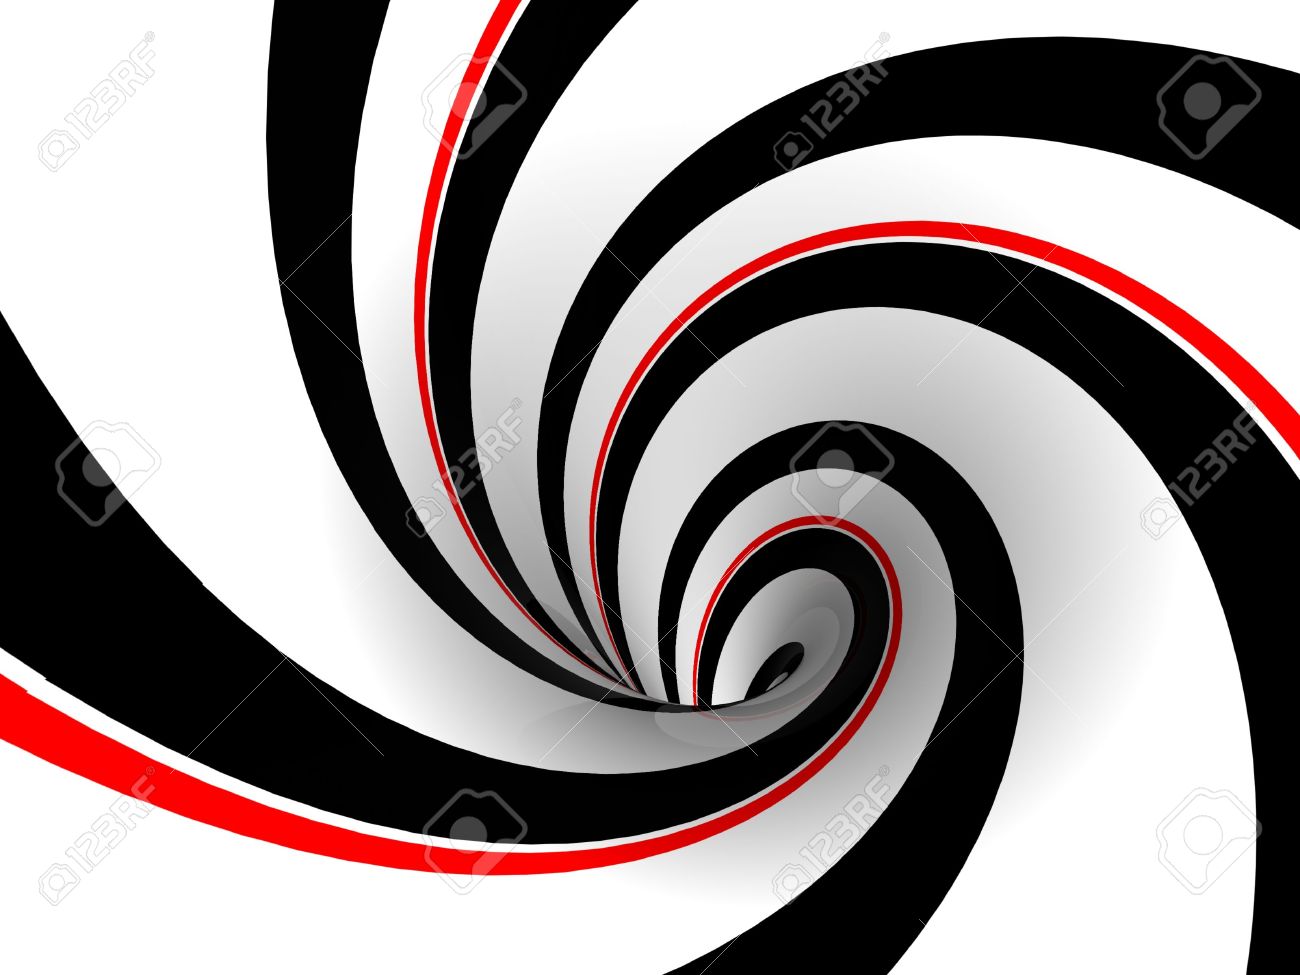 4314318-abstract-retro-image-of-a-red-black-and-white-swirl.jpg